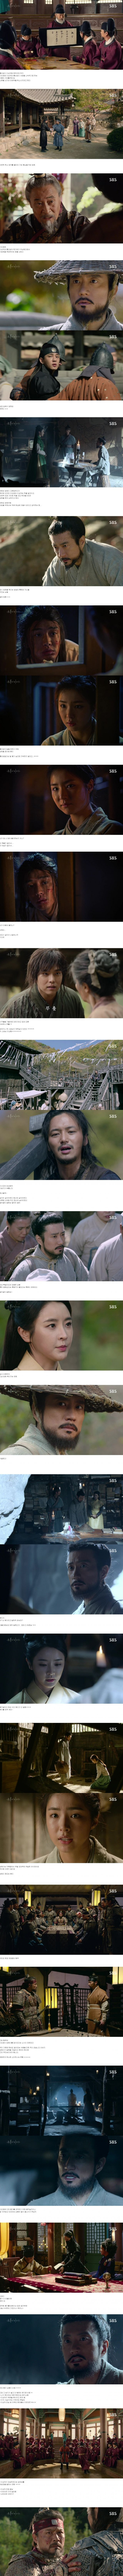 episode 11 captures for the Korean drama 'Six Flying Dragons'